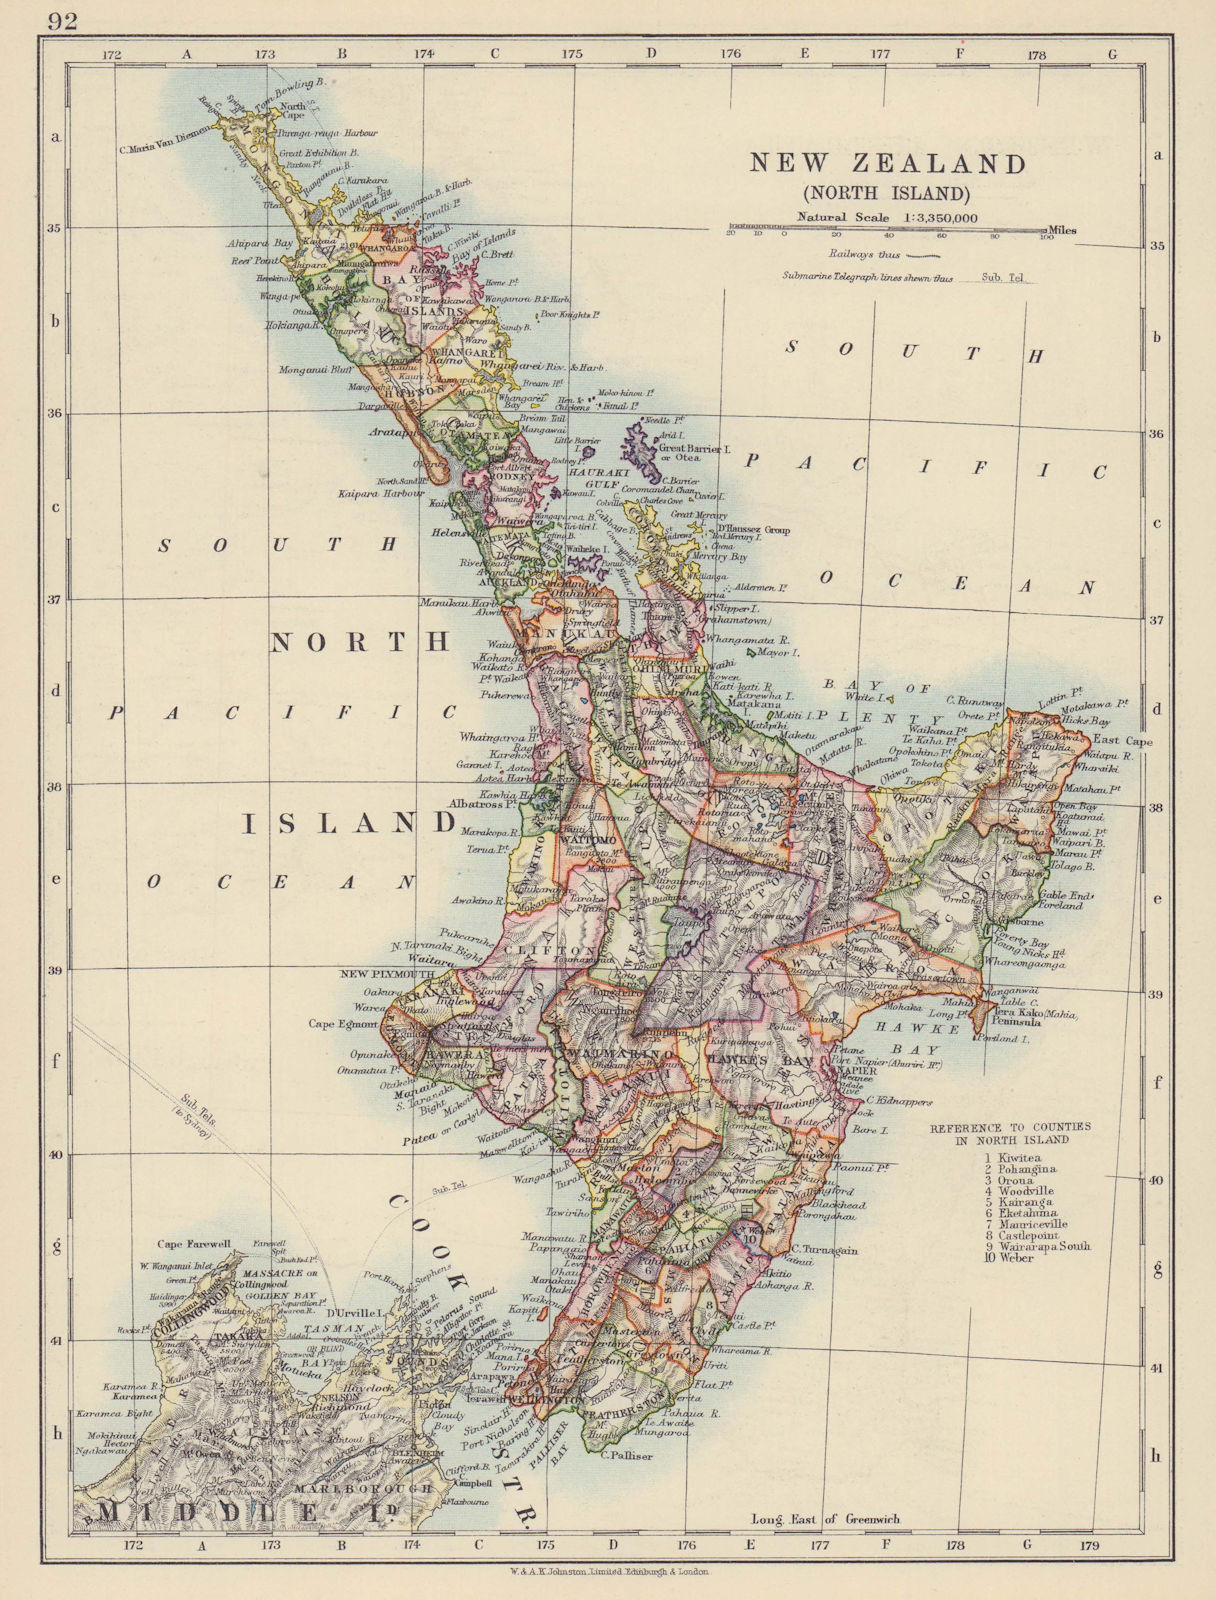 NORTH ISLAND NEW ZEALAND. Showing counties telegraph cables. JOHNSTON 1910 map